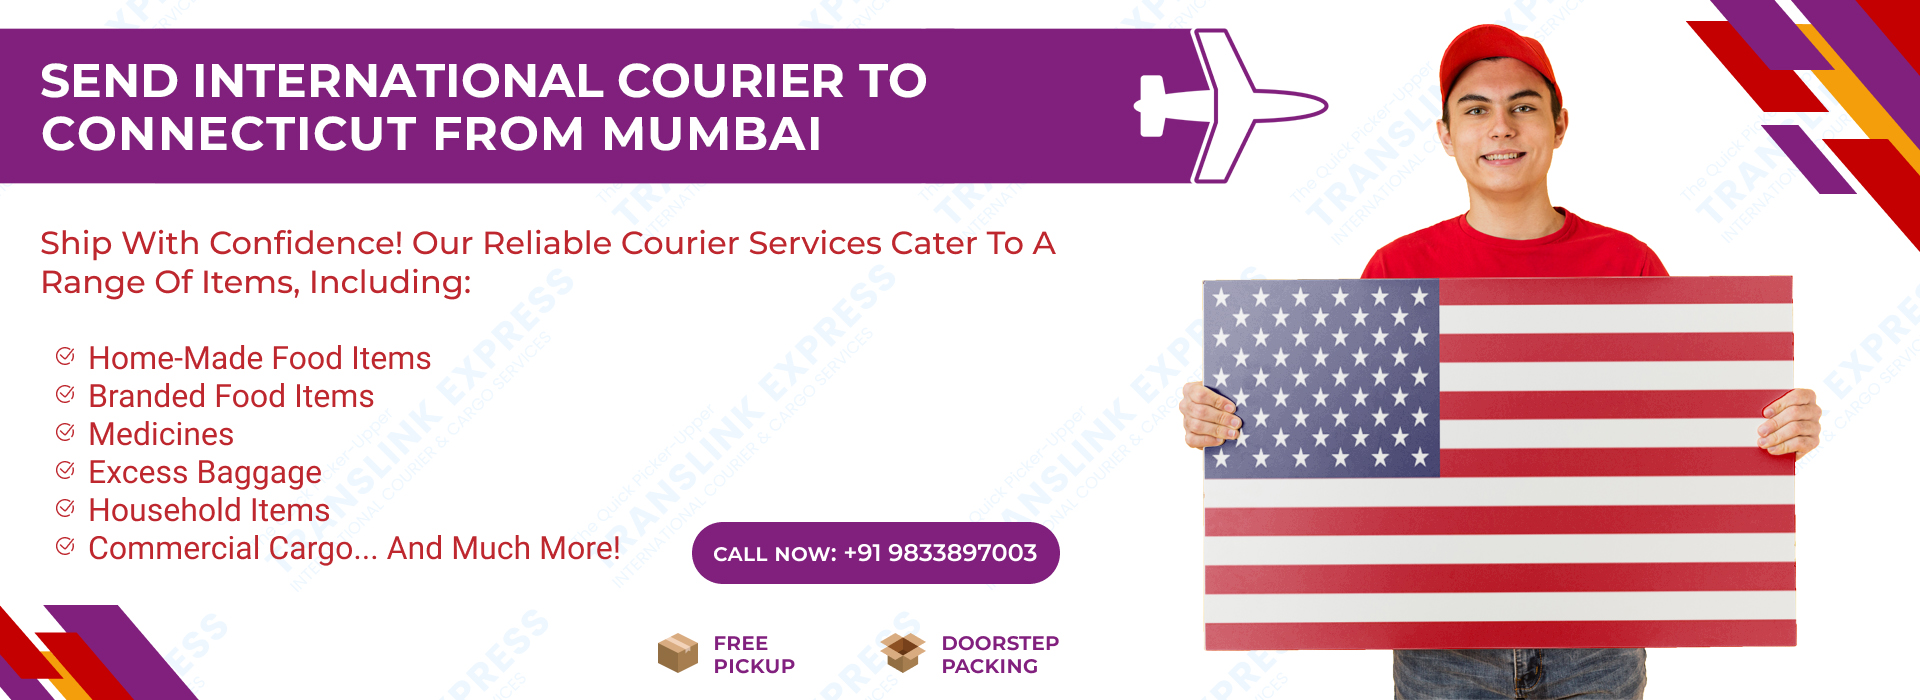 Courier to Connecticut From Mumbai